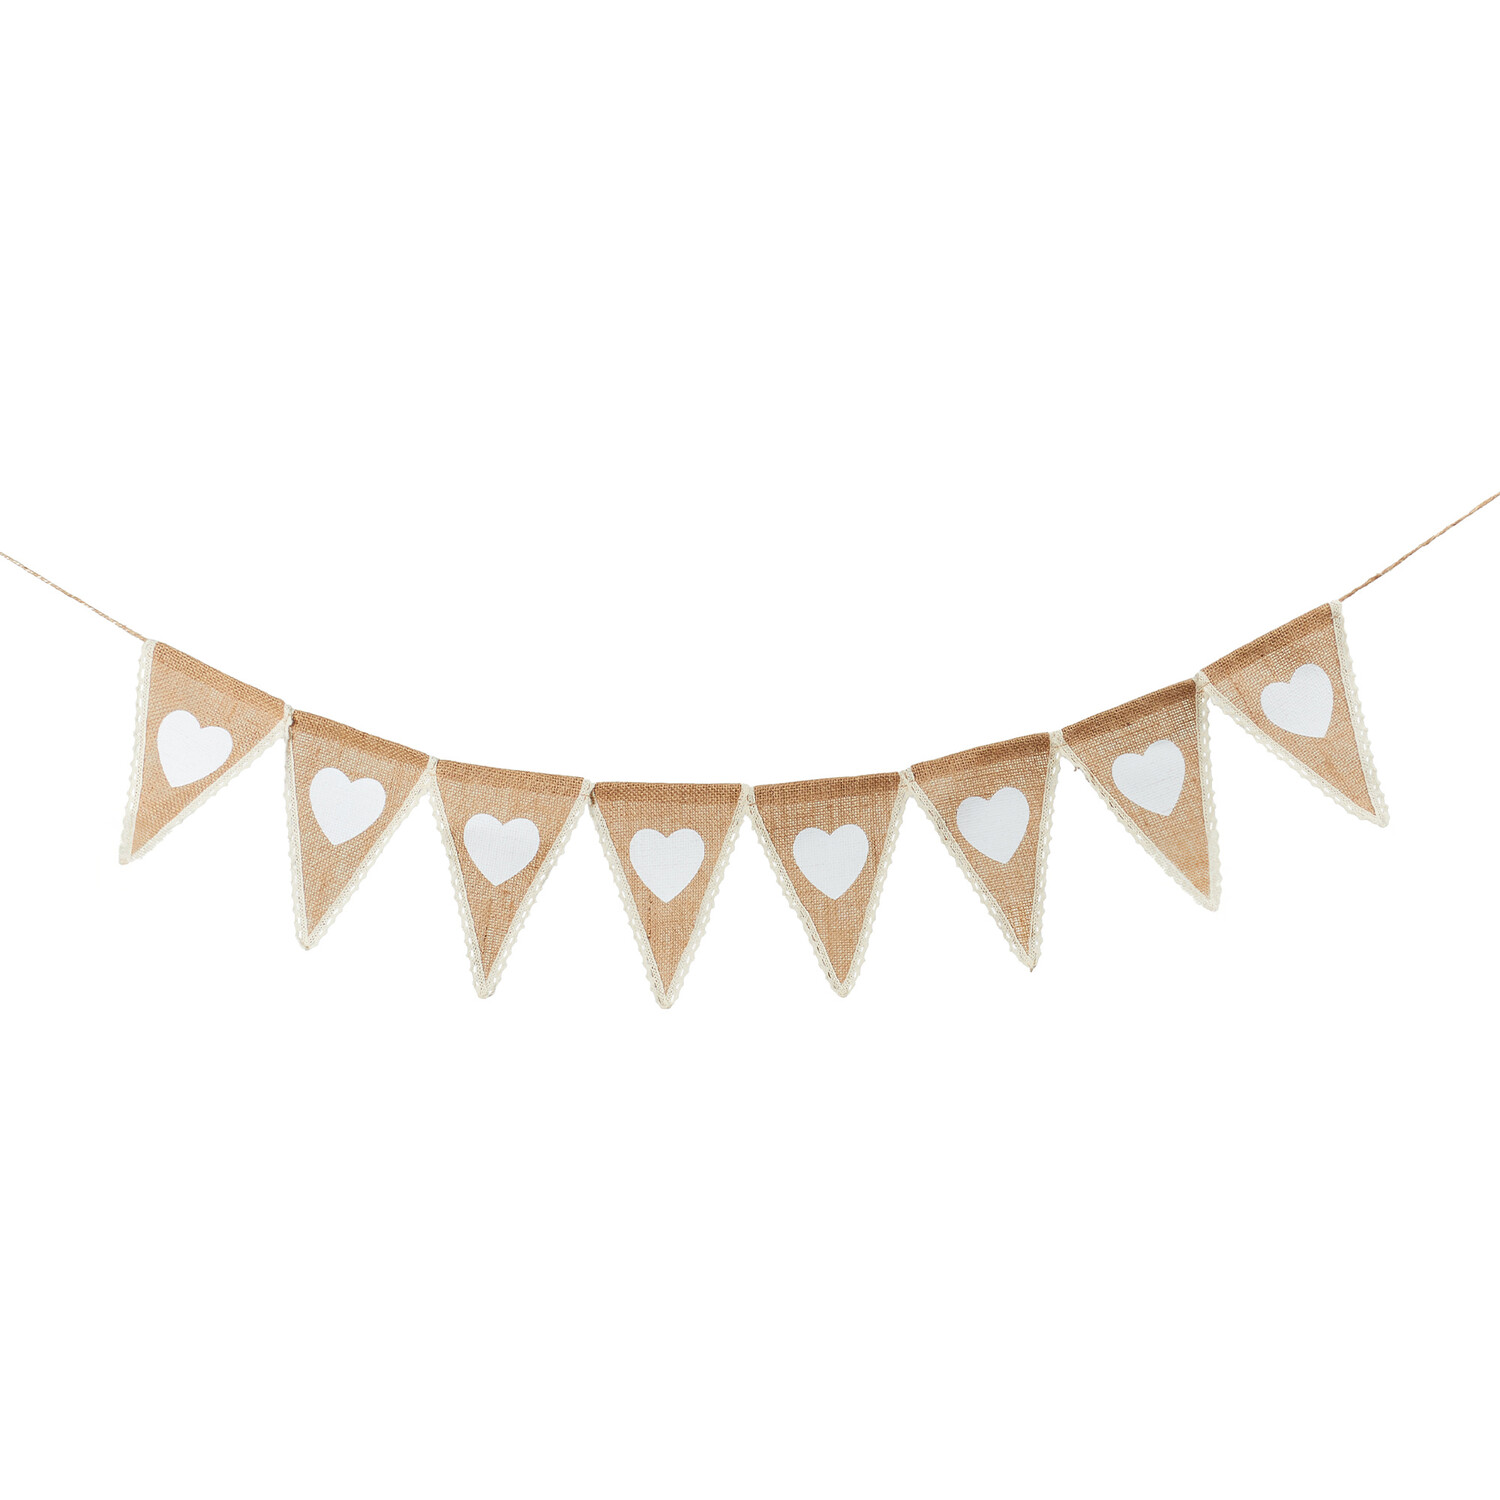 Hessian & Lace Heart Bunting - Natural Image 1